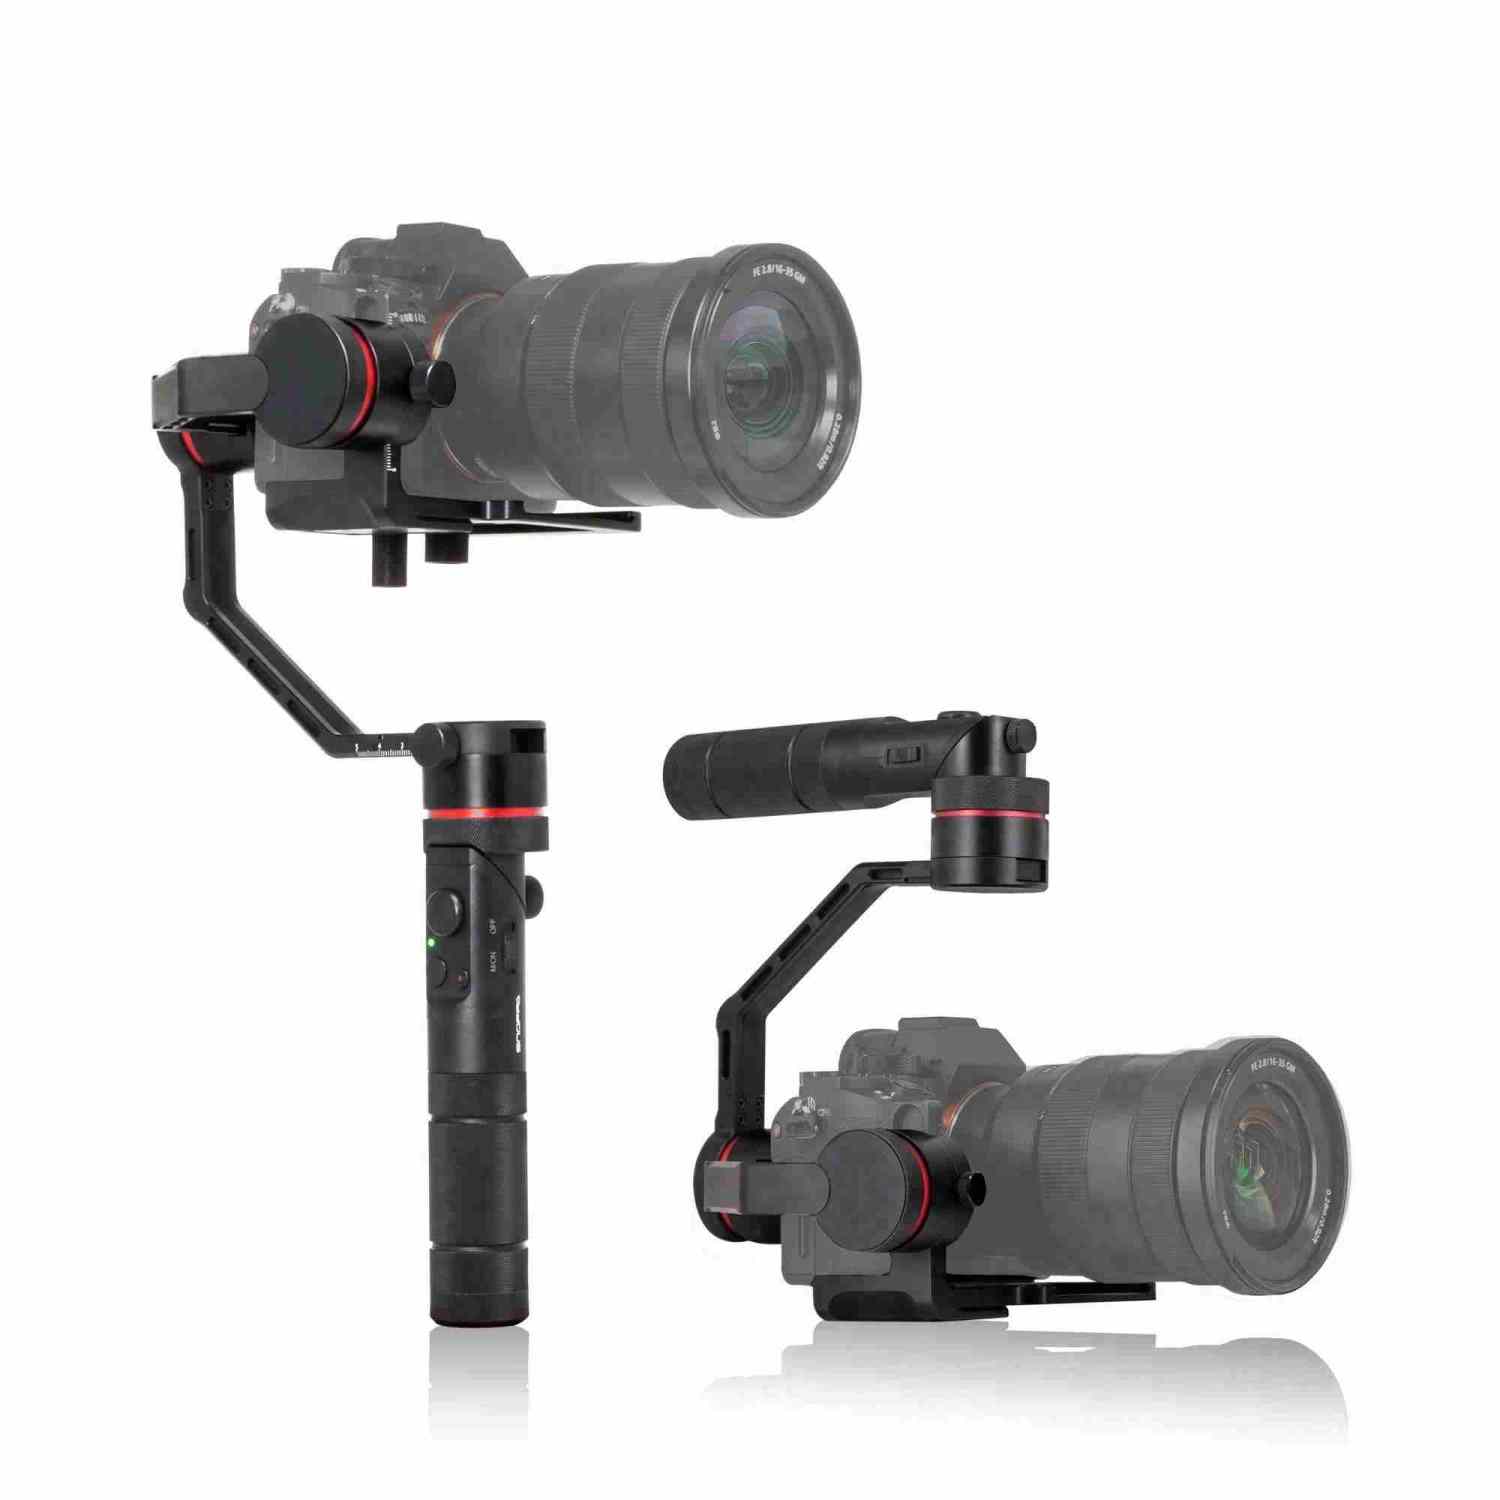 For Phones and Lightweight Cameras